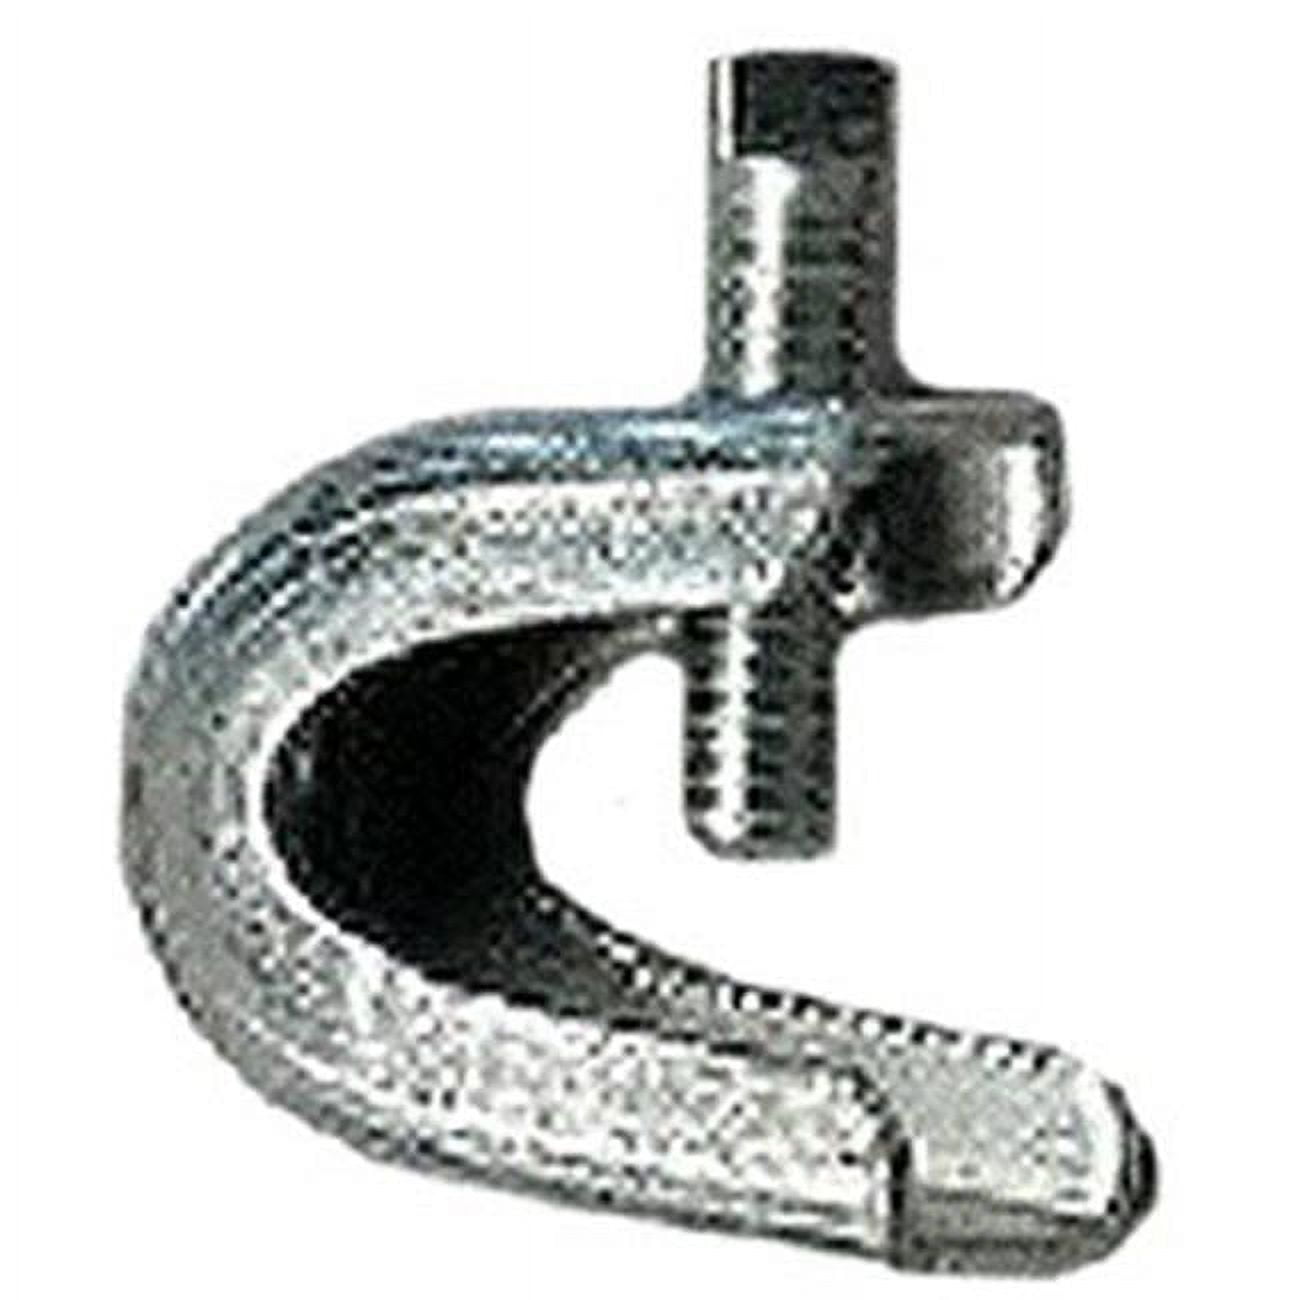 25 1 In. Zinc-plated Conduit Clamps